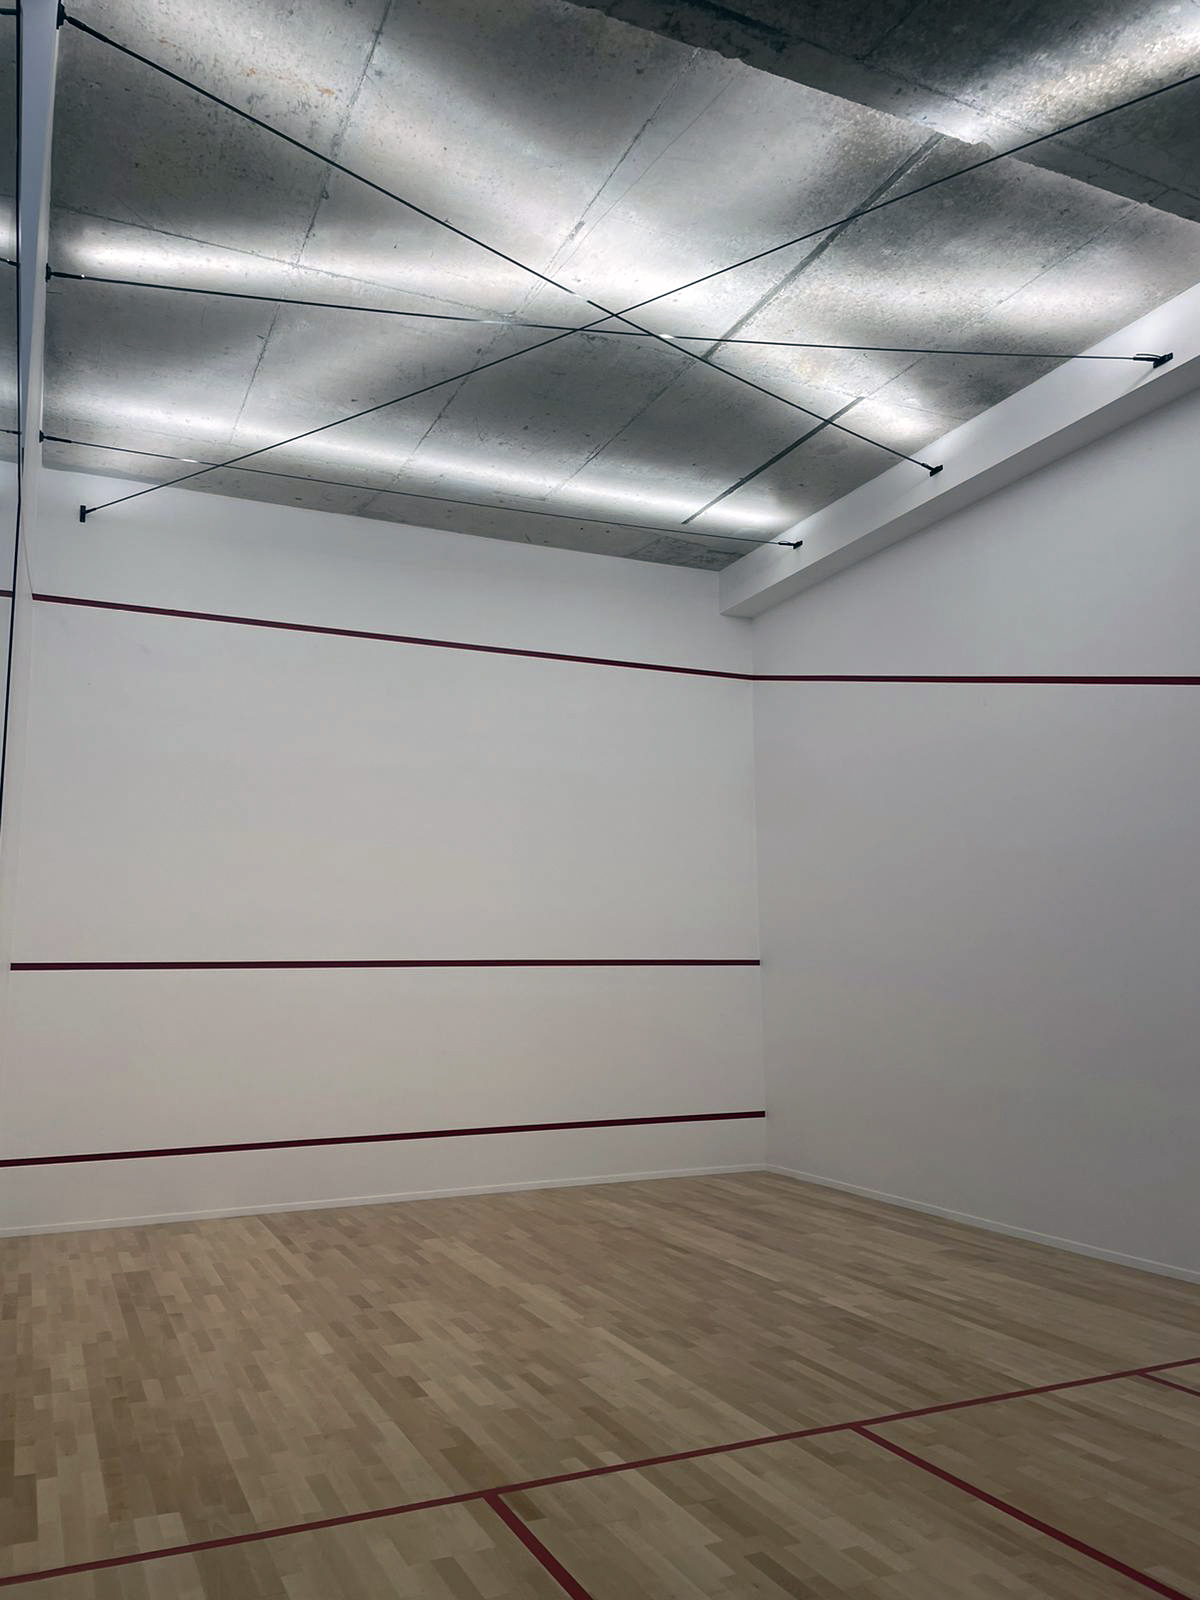 Astral projects squash court Smart Lighting and Audio Control System